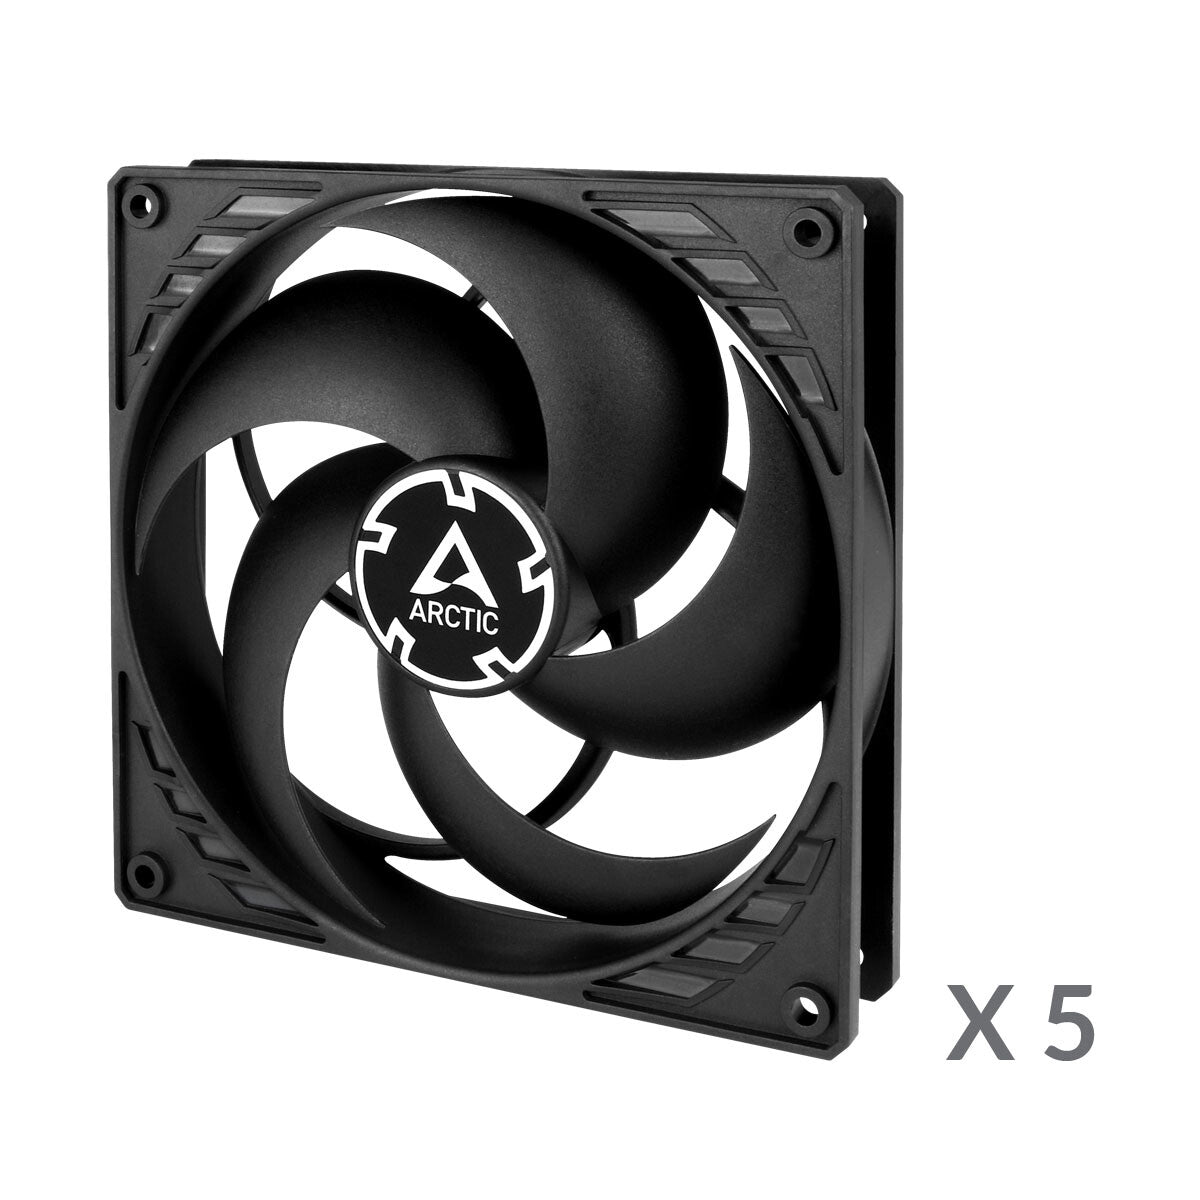 ARCTIC P14 - Computer Case Fan in Black - 140mm (Pack of 5)